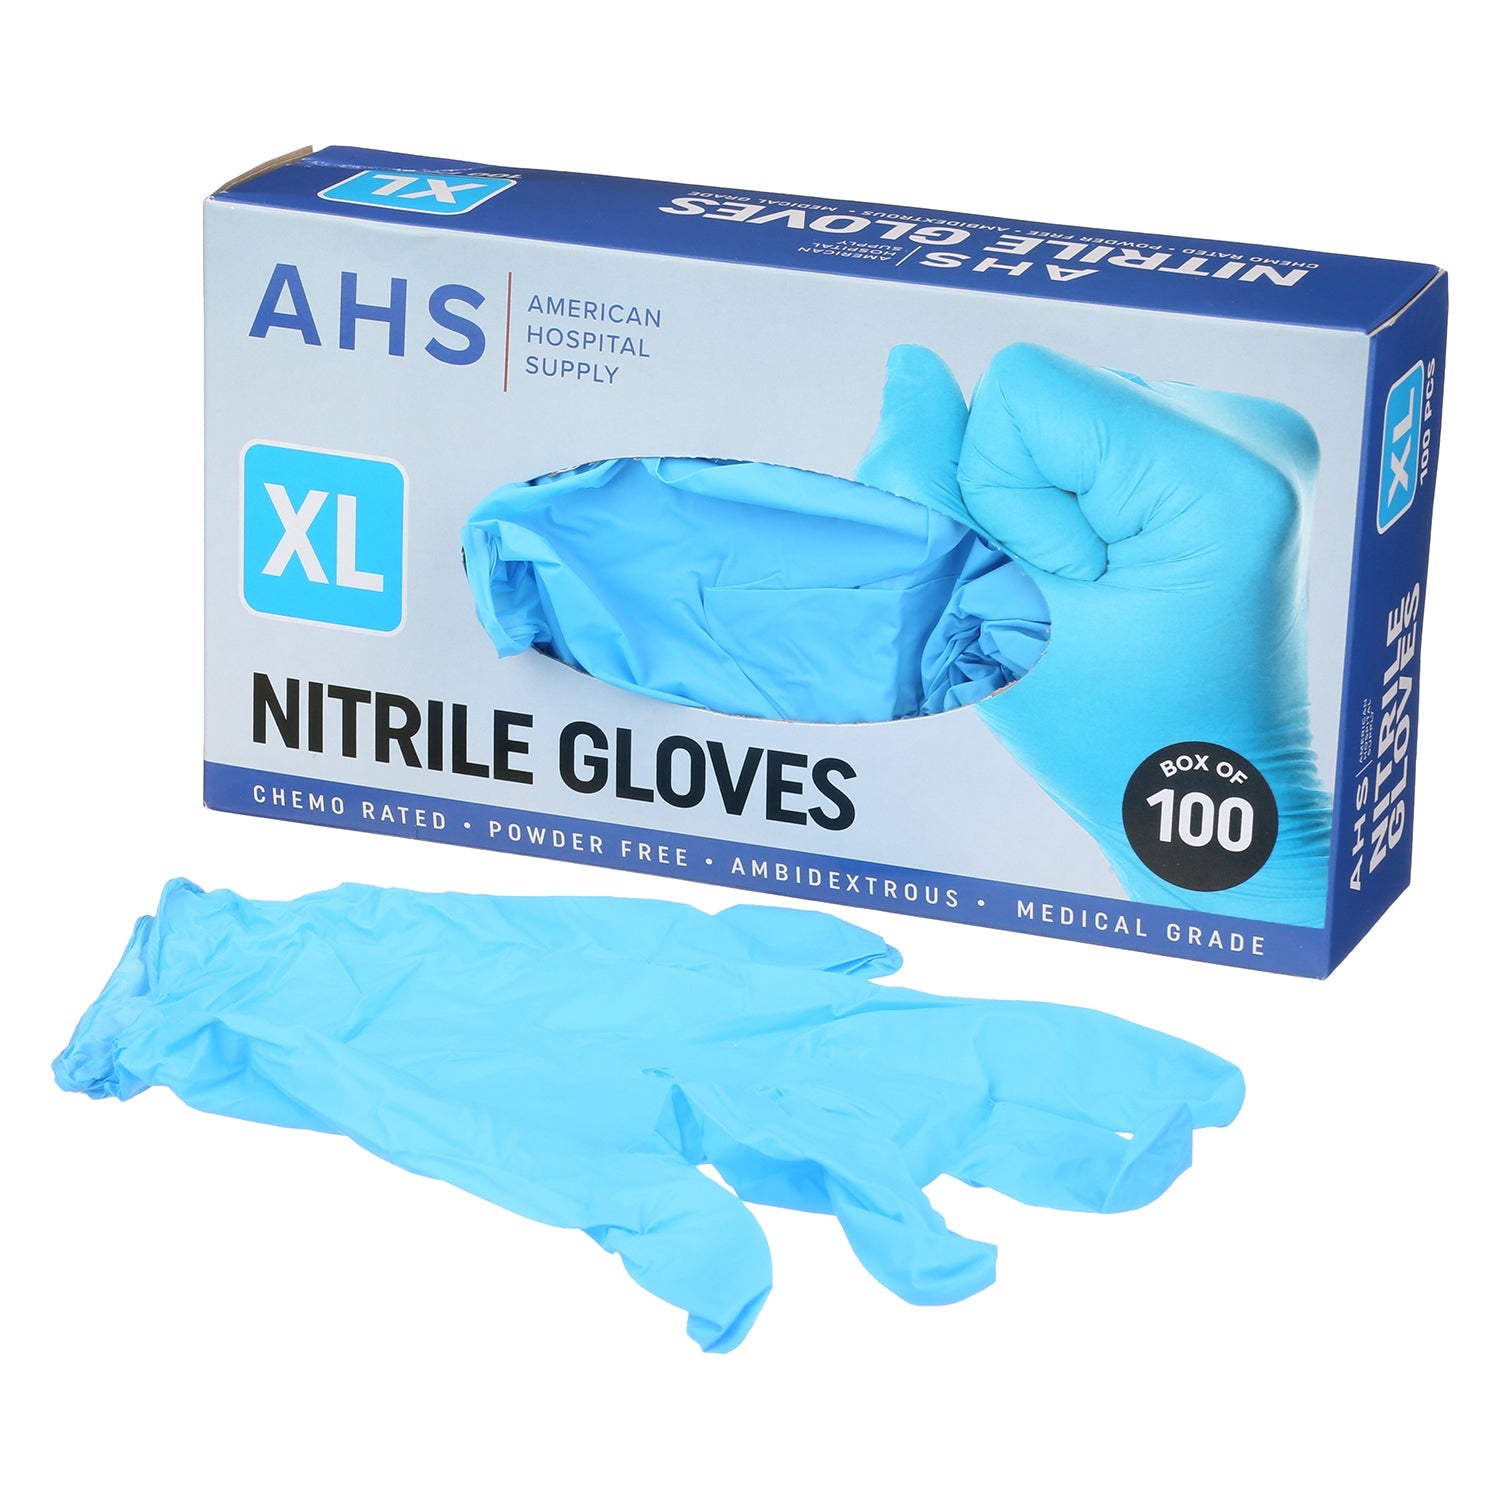 AHS Disposable Nitrile Exam Gloves, 3.5 MM, Chemo-Rated